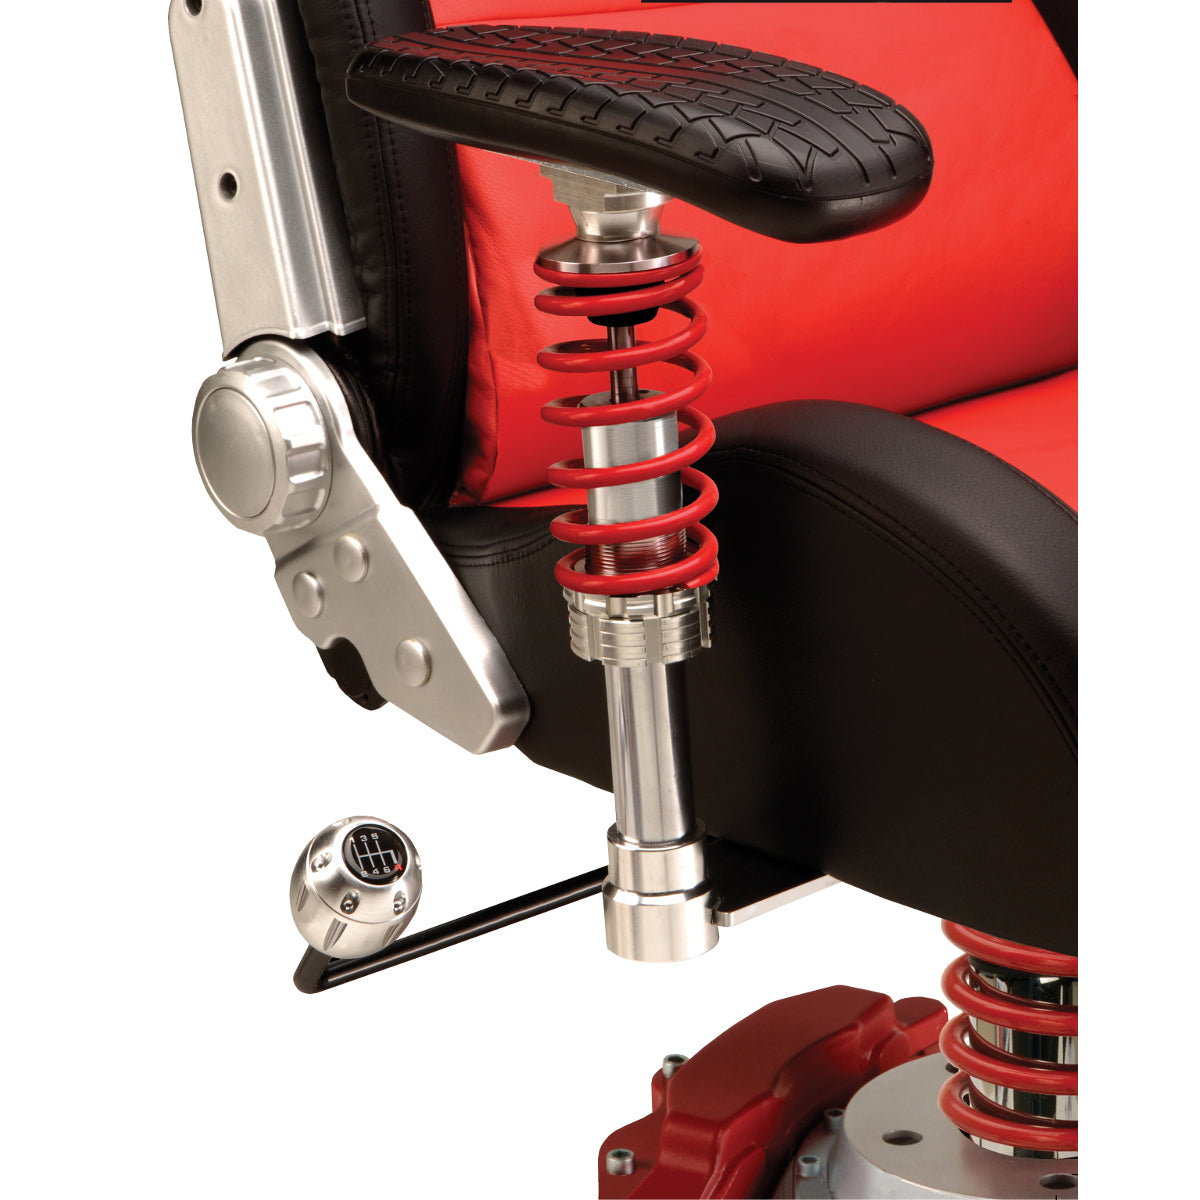 Pitstop Furniture LXE High Back Automotive Themed Office Chair